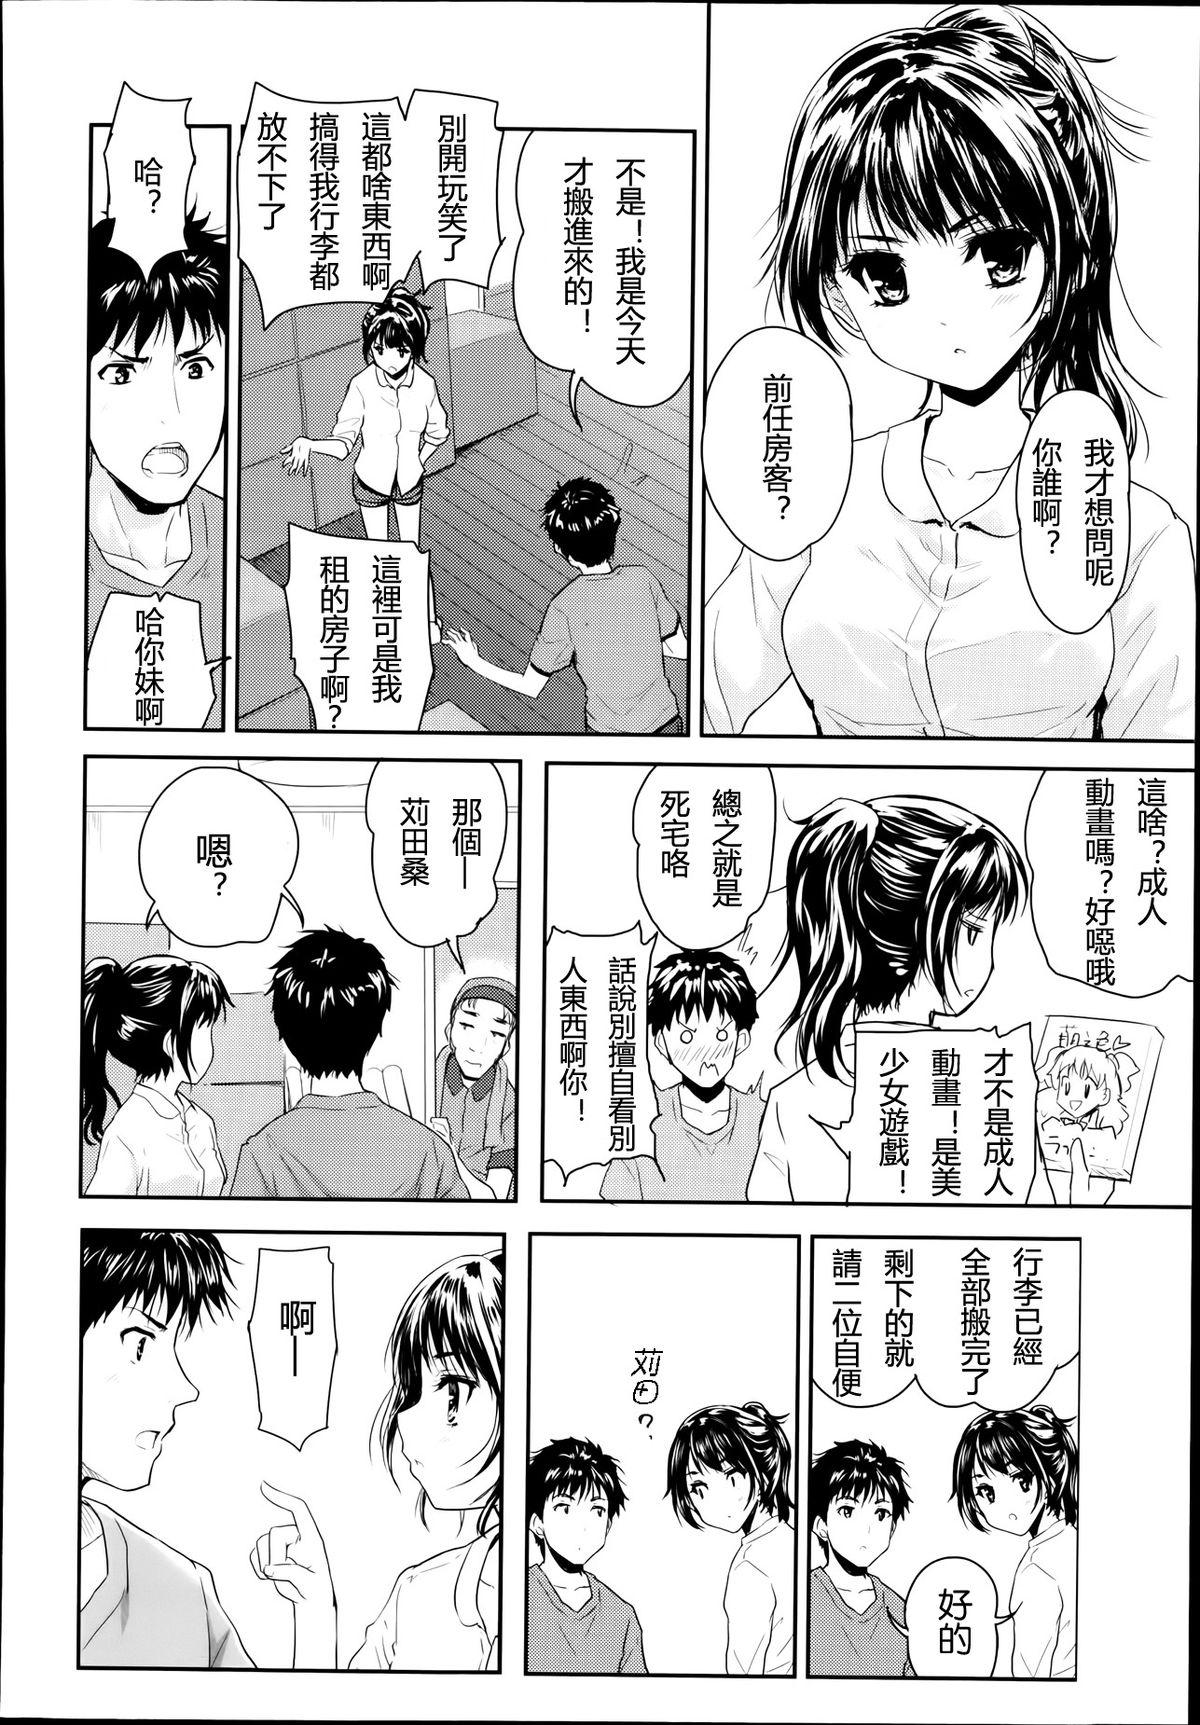 Huge 1LDK Real Couple - Page 4